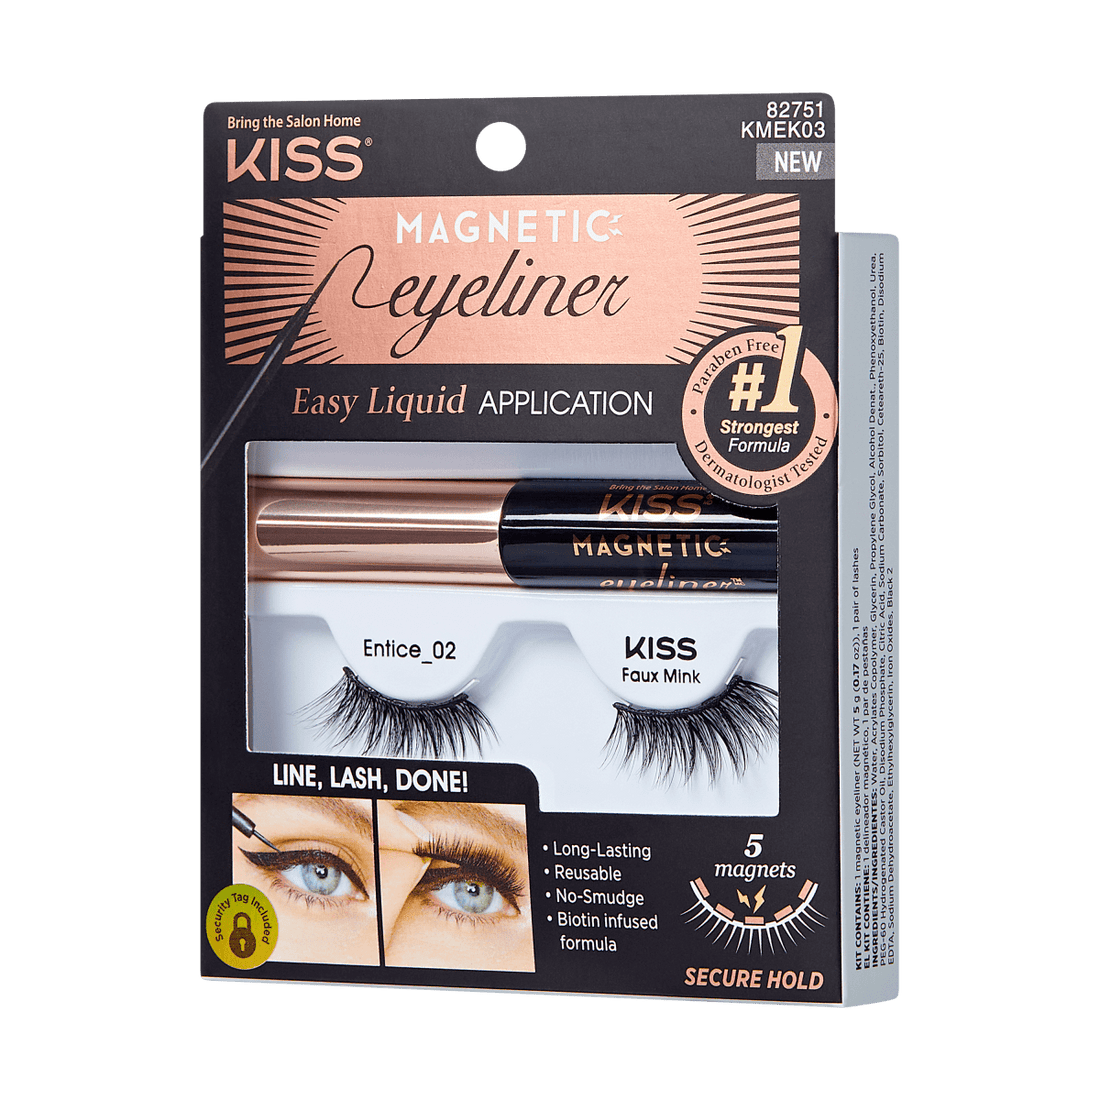 Magnetic lashes kit includes magnetic eyeliner and a pair of magnetic eyelashes. 